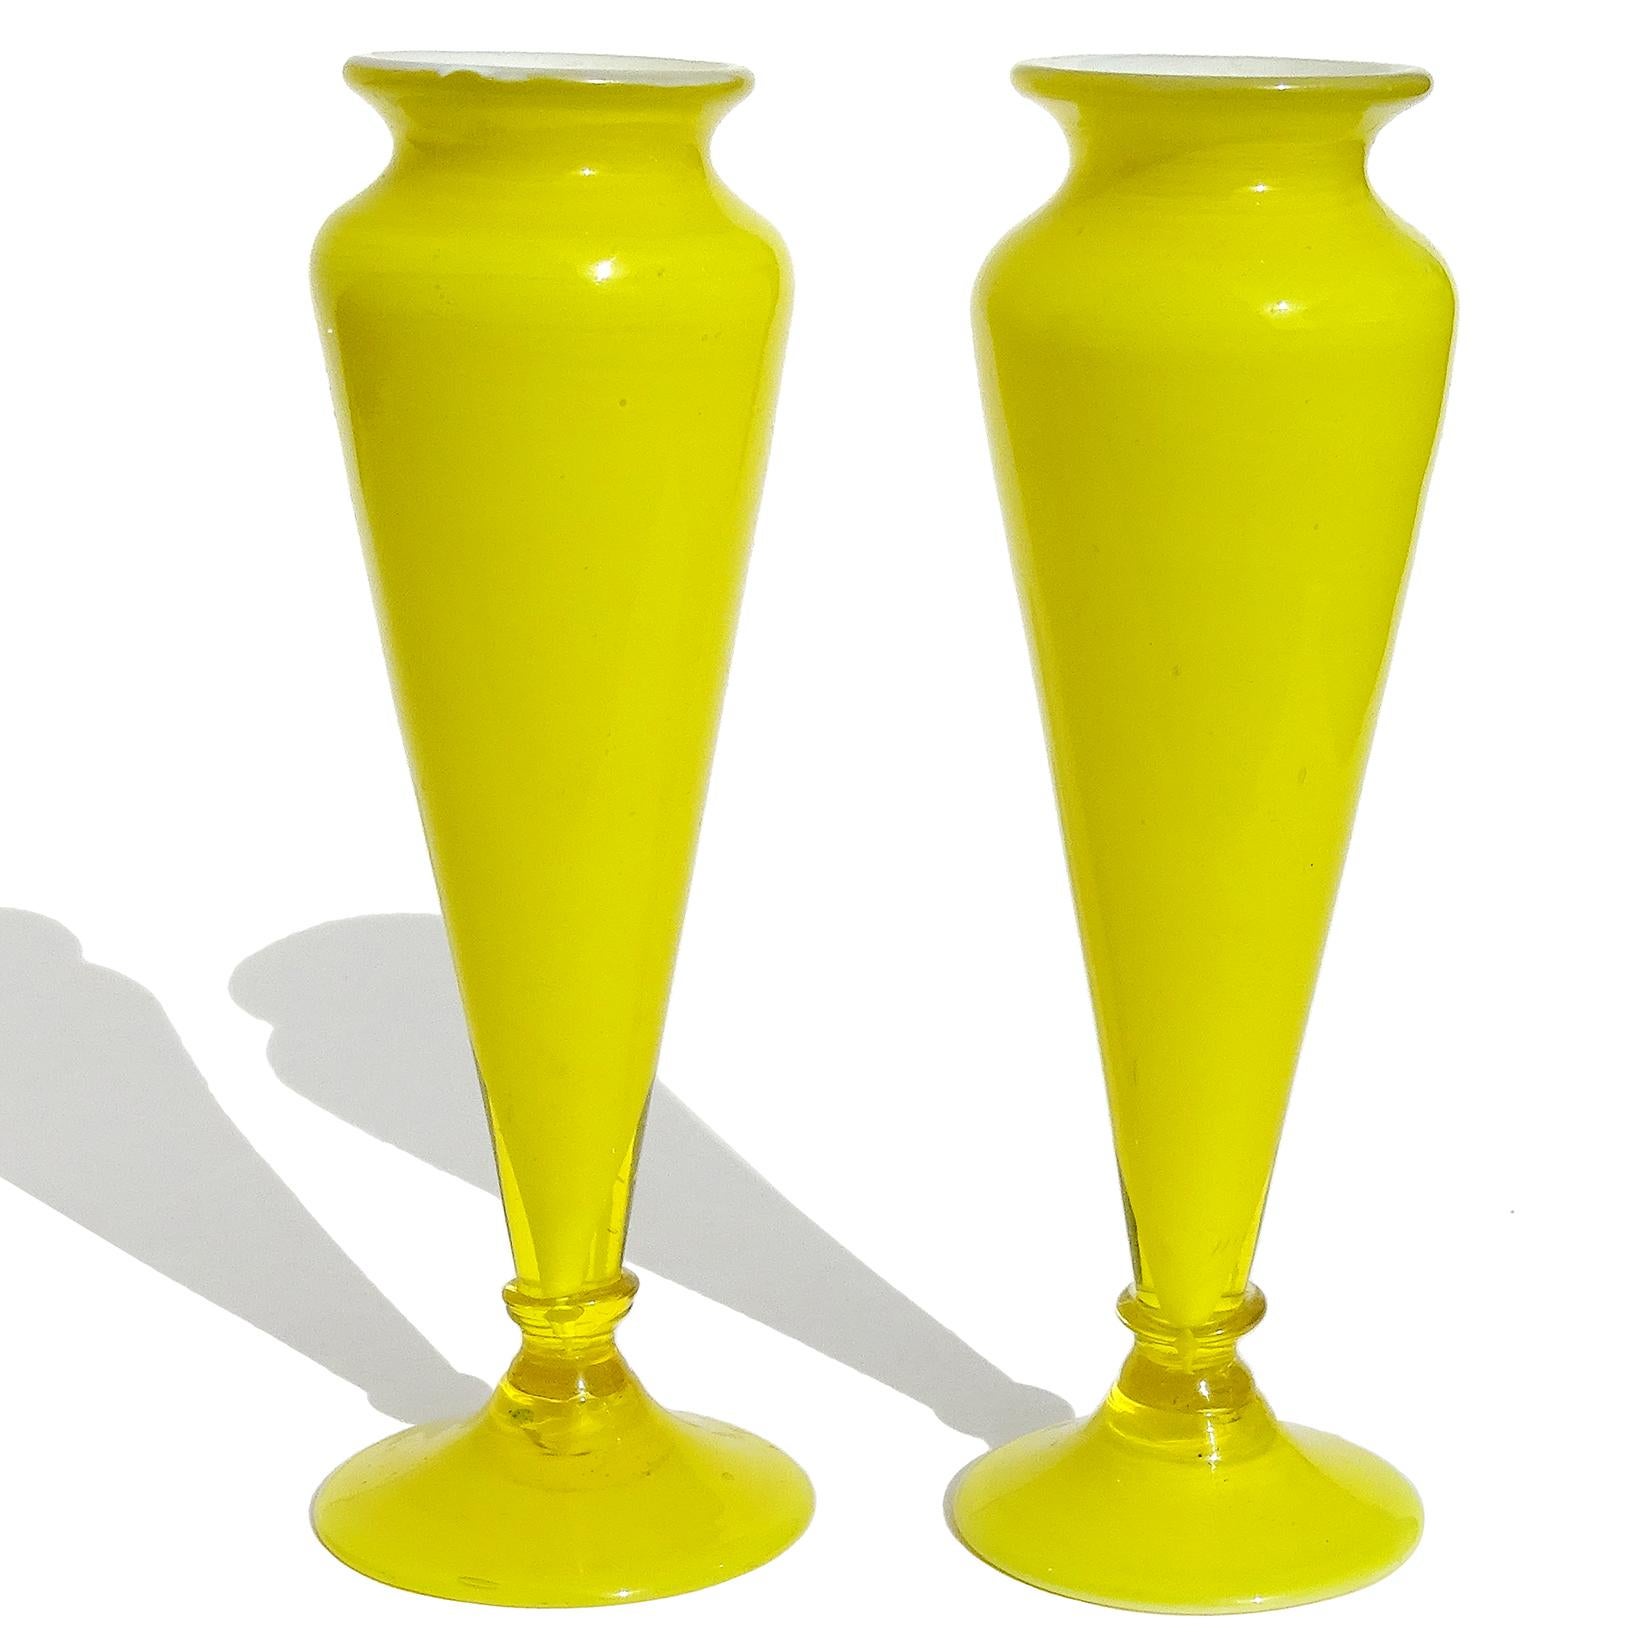 Beautiful pair of antique Murano hand blown bright yellow over white, Italian art glass cabinet flower vases. Documented and labelled as Vetreria Barovier, Murano, made in Italy. Both vases still have the original early labels underneath (last